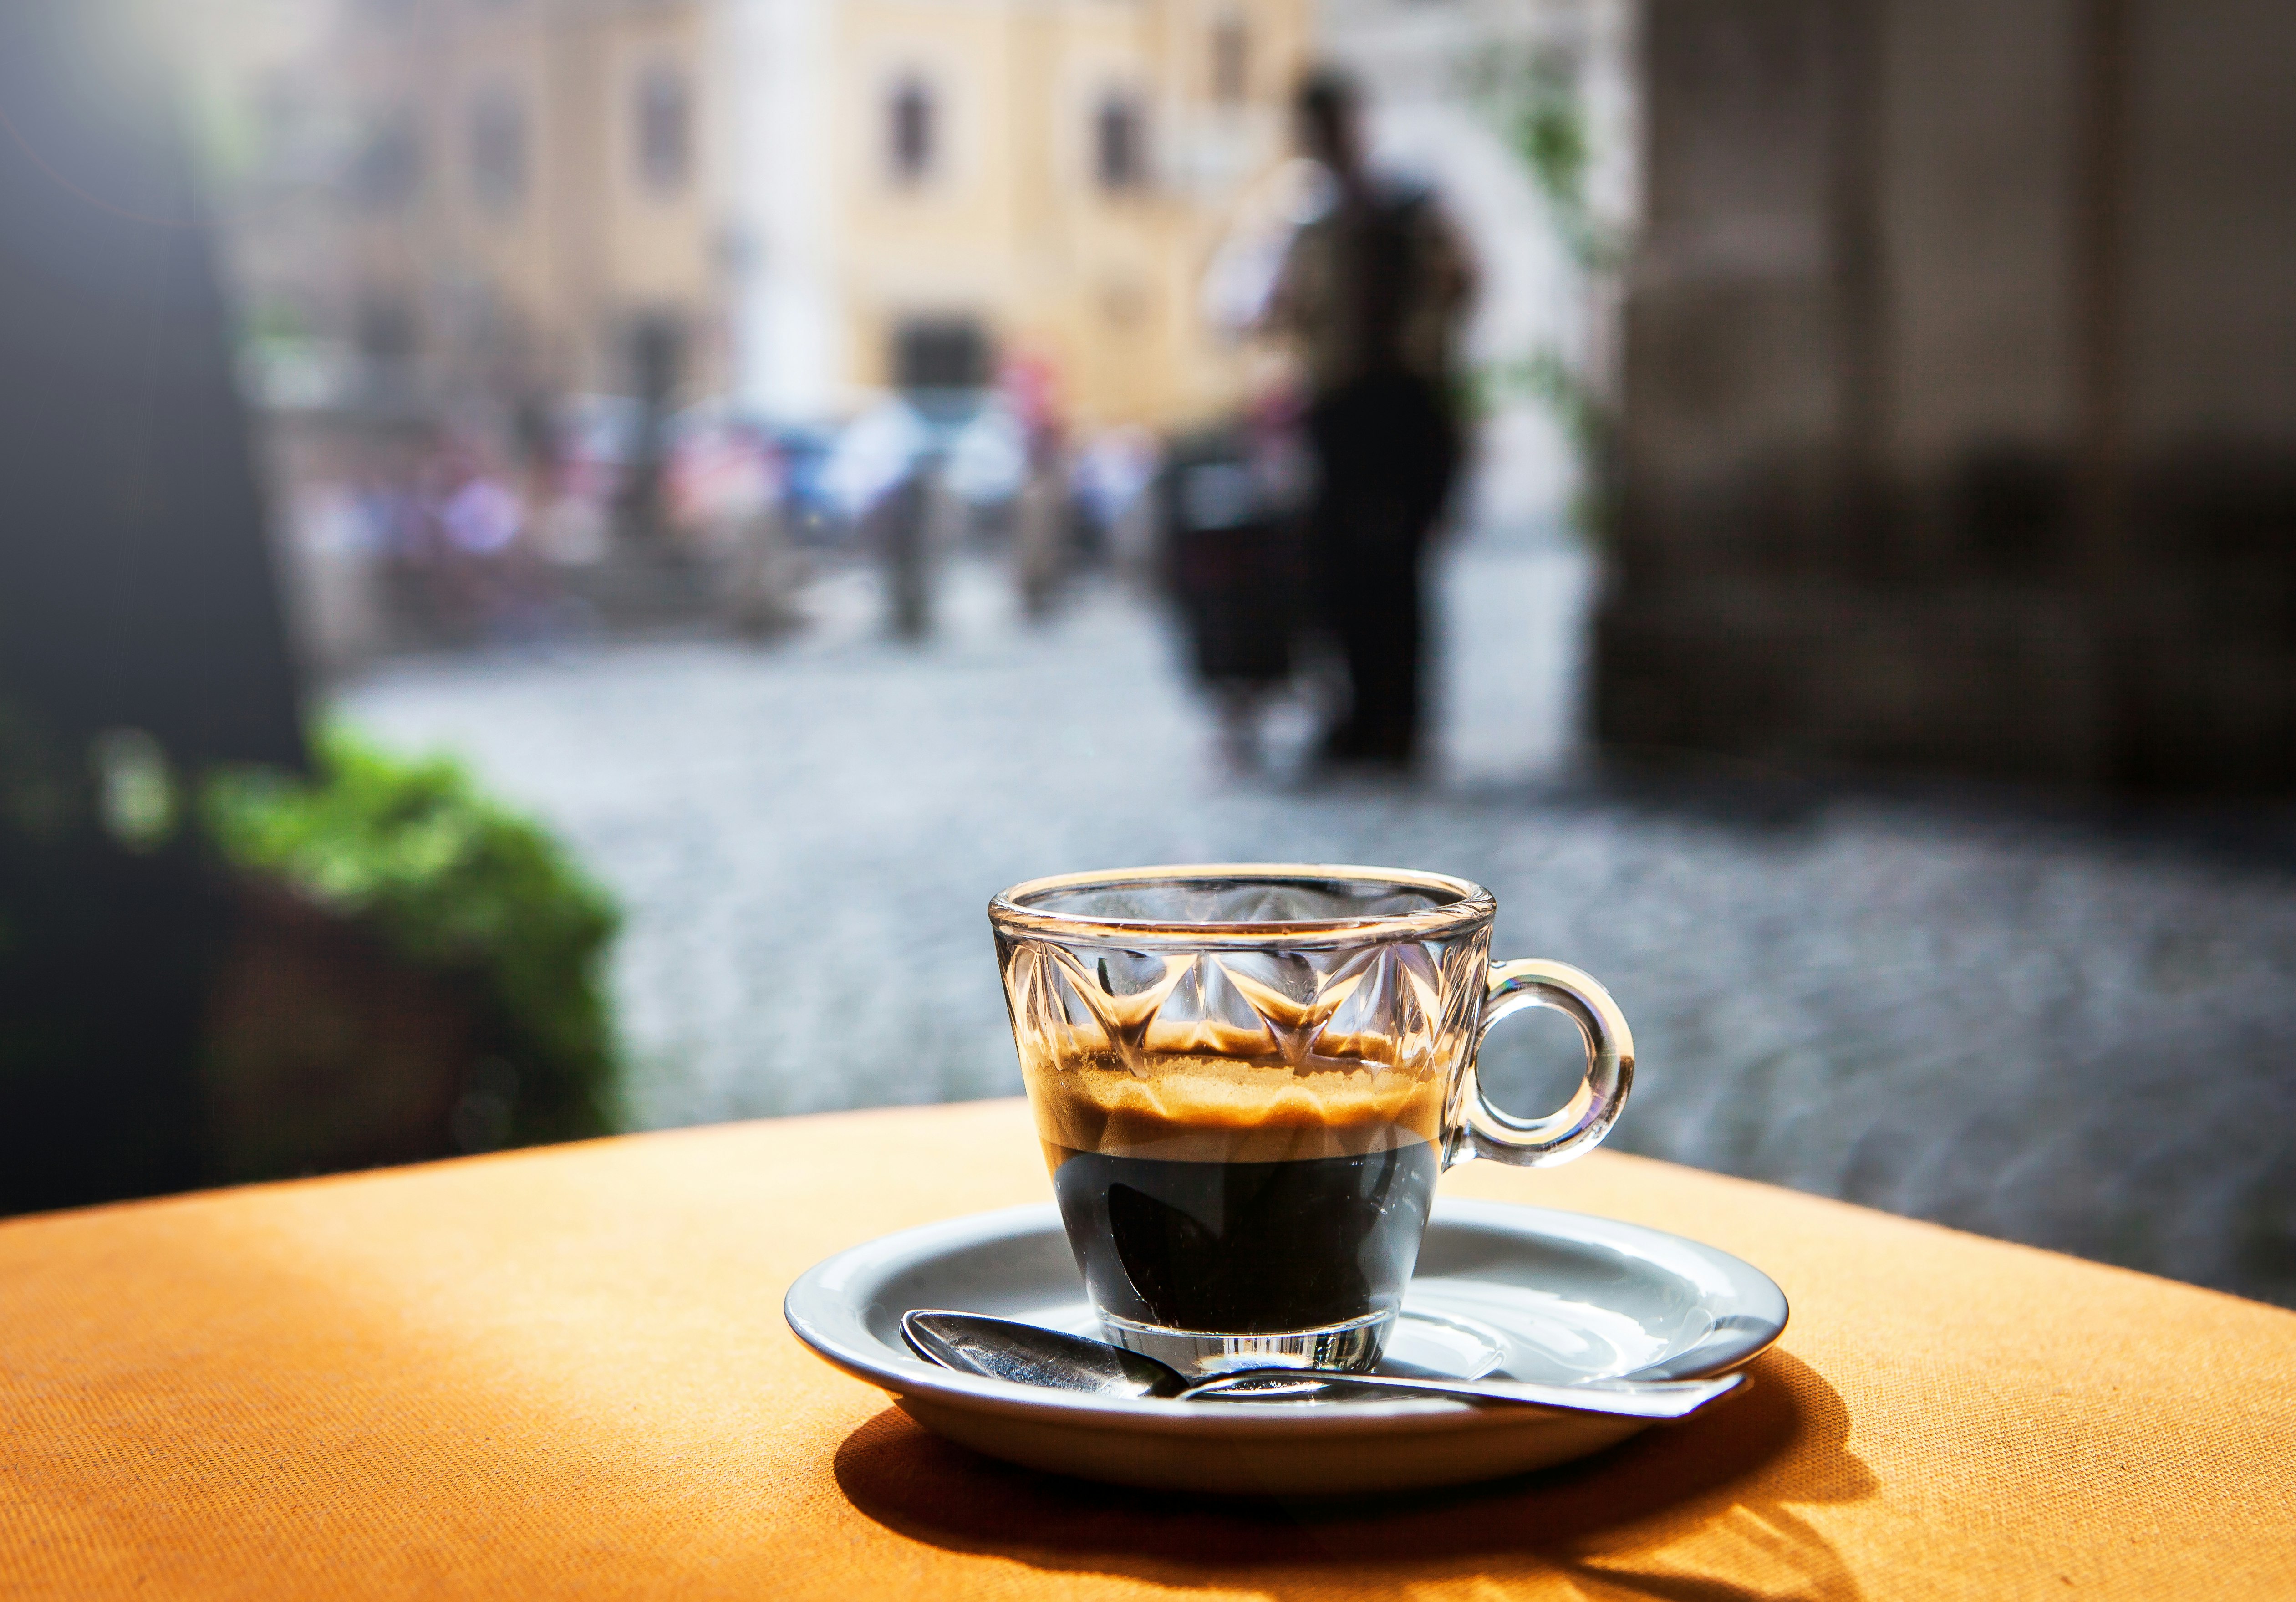 An espresso in a decorative glass cup sitting on a saucer on a table outside. The street scene in the background is in soft focus.